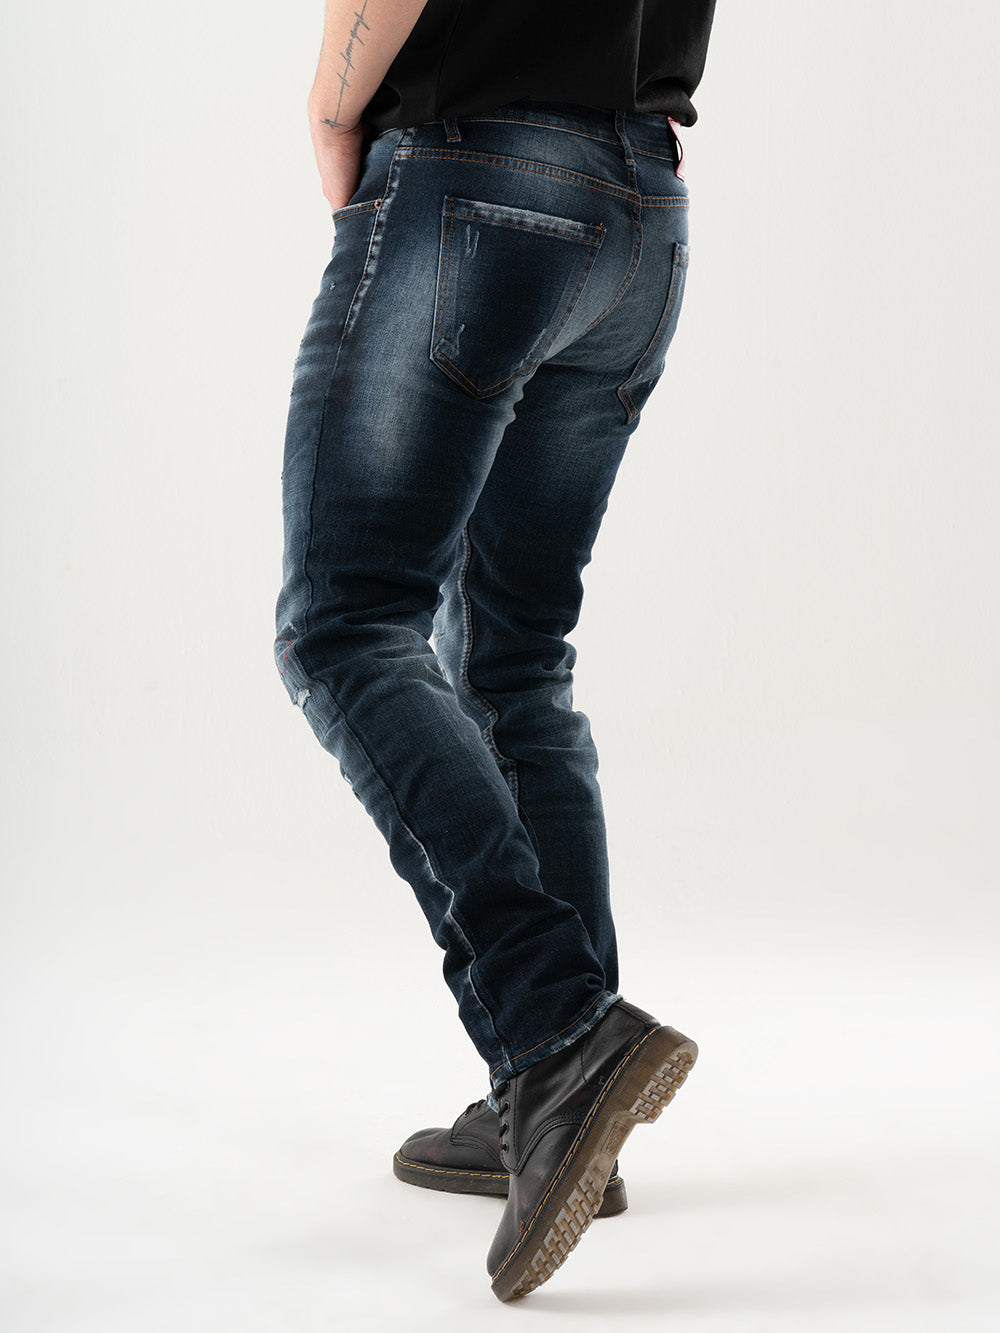 A man wearing LIGHTNING jeans is standing in front of a white background.